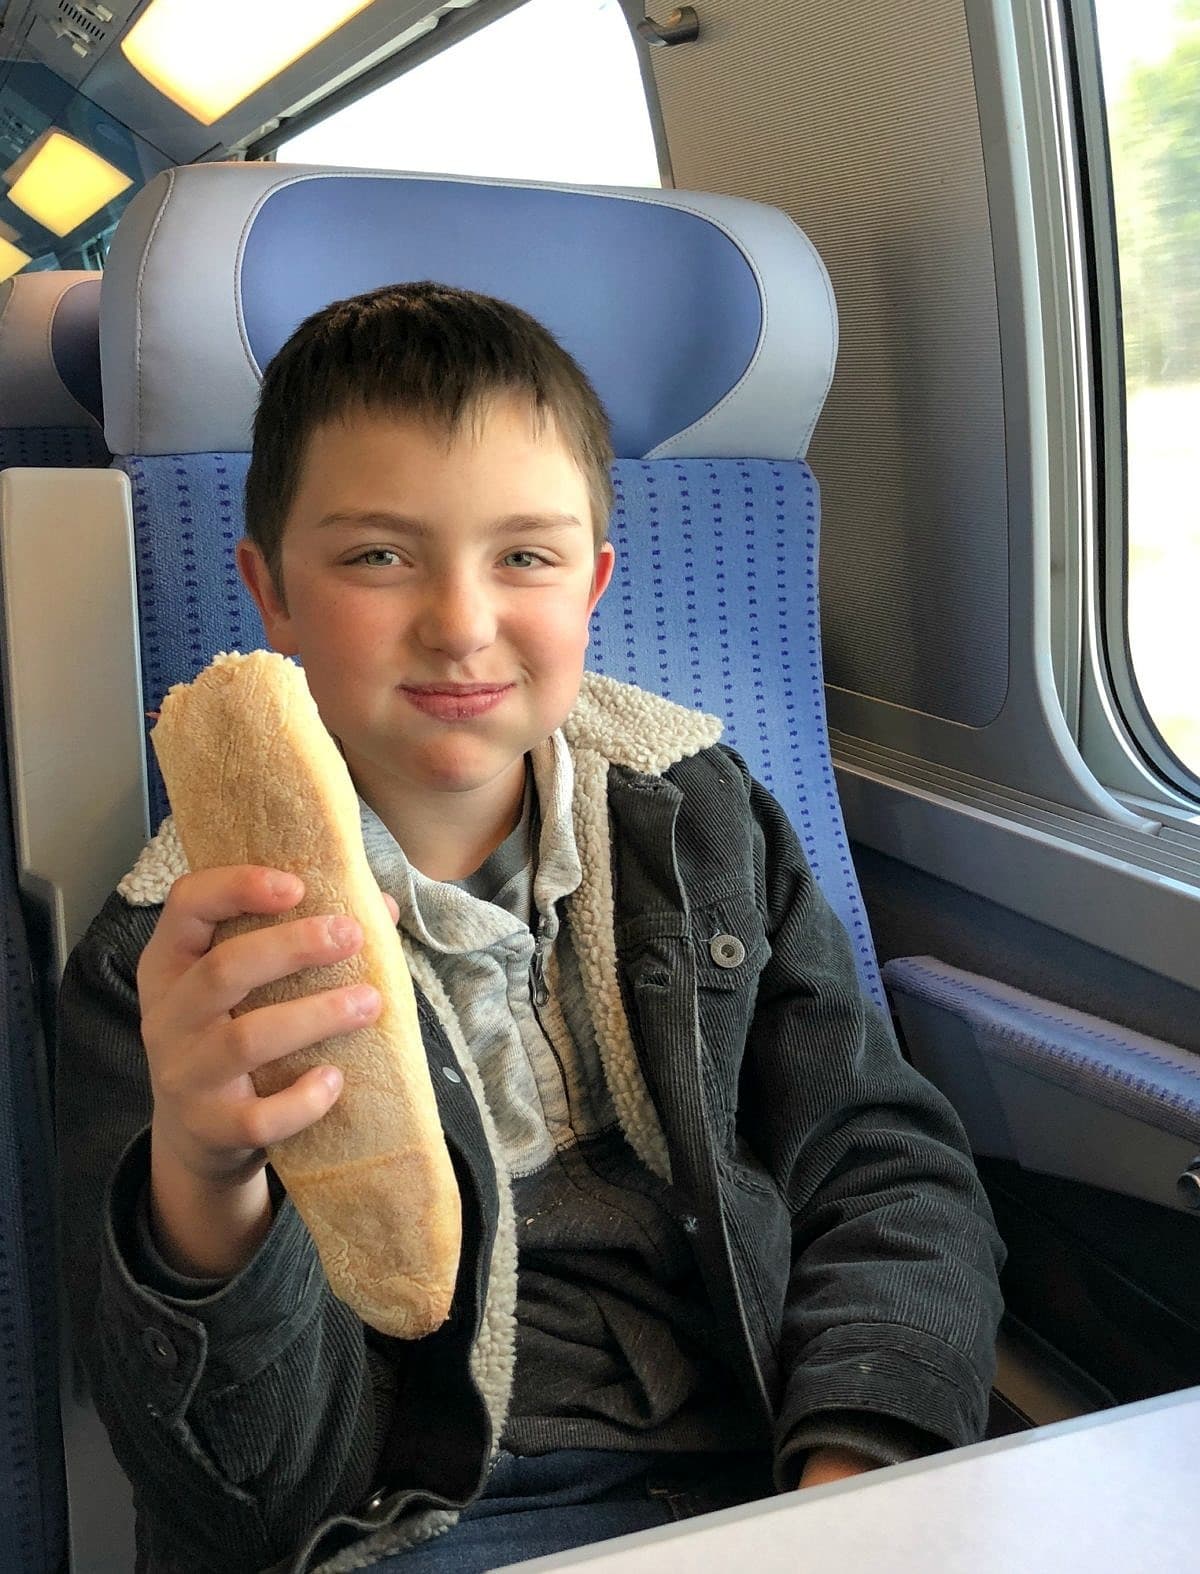 The best sandwich of this kid's life in Paris